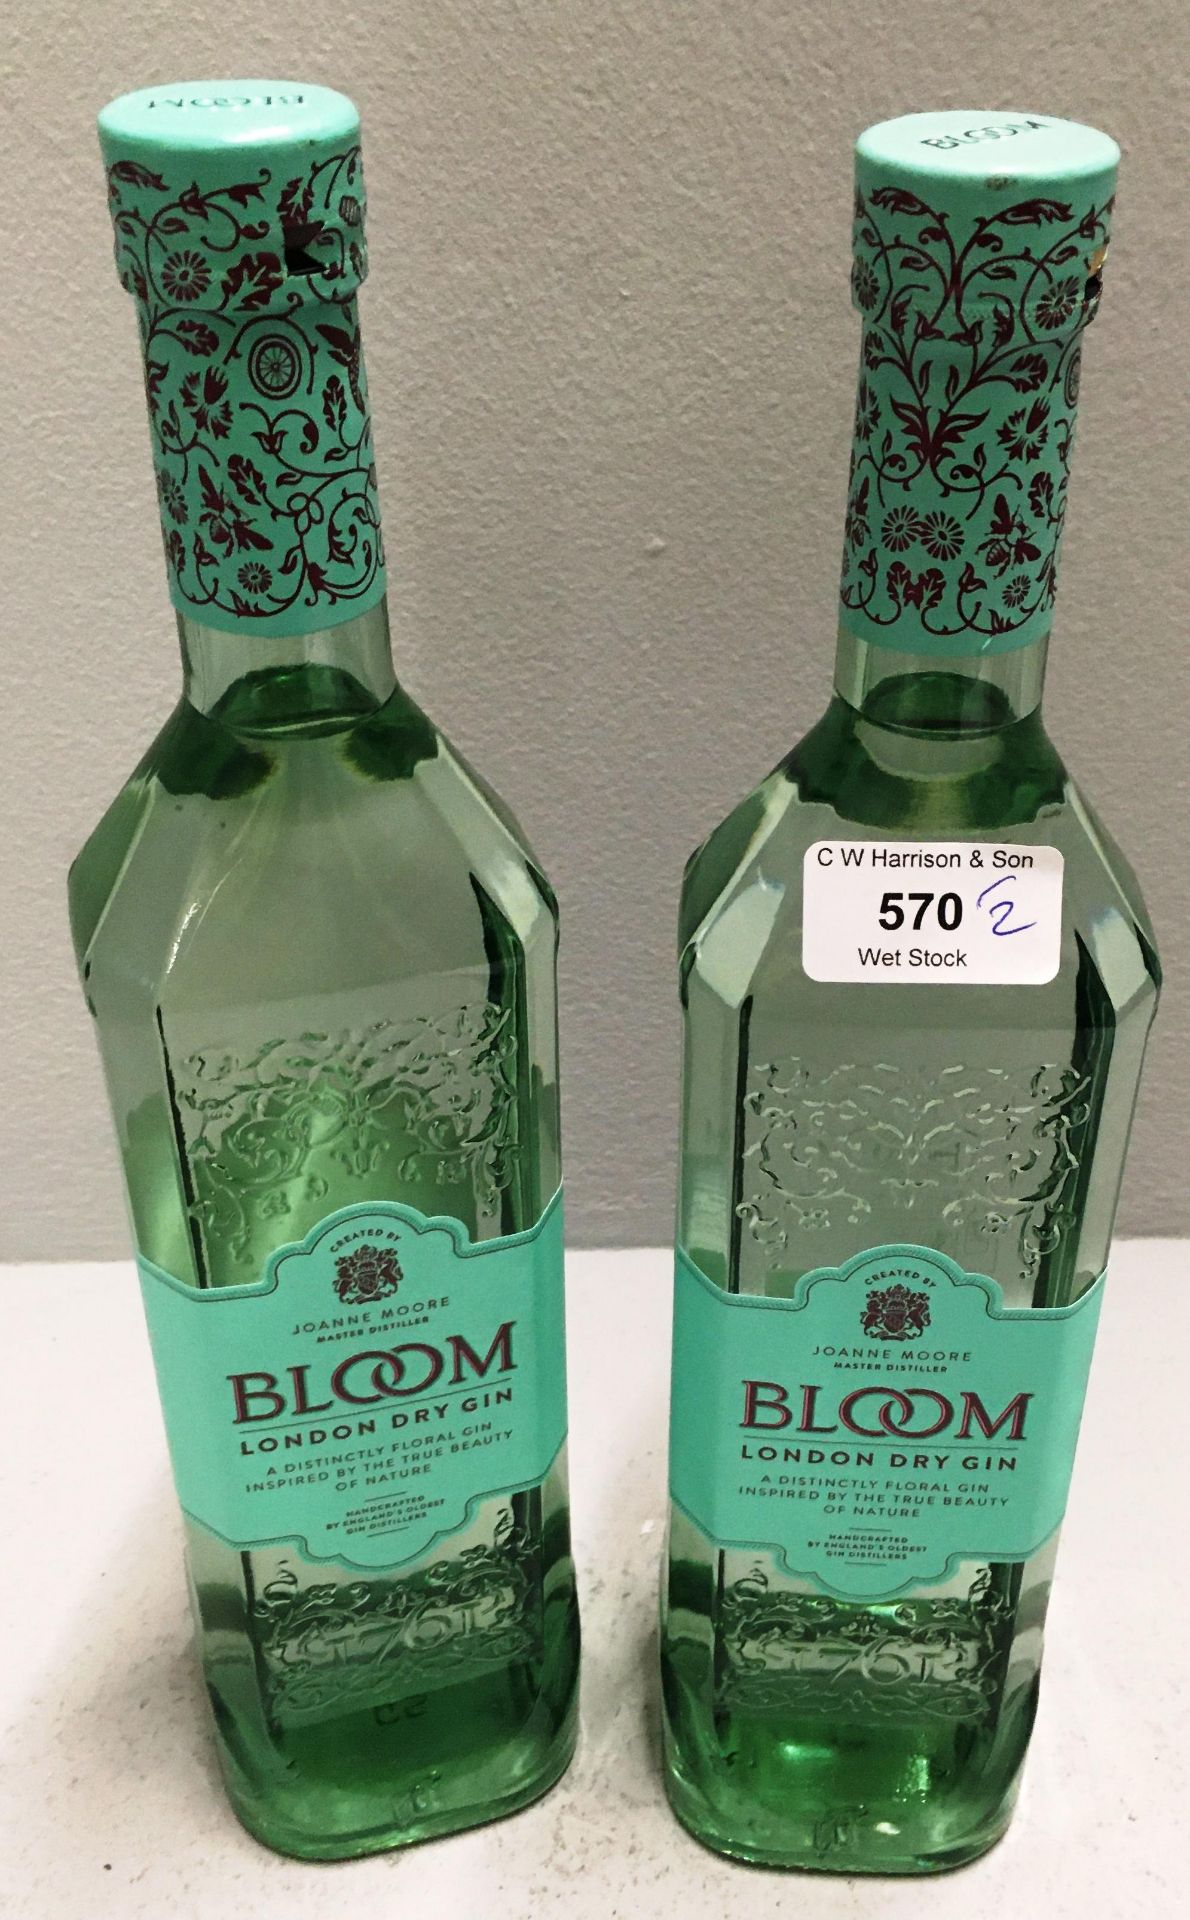 2 x 70cl bottles of Bloom London Dry Gin